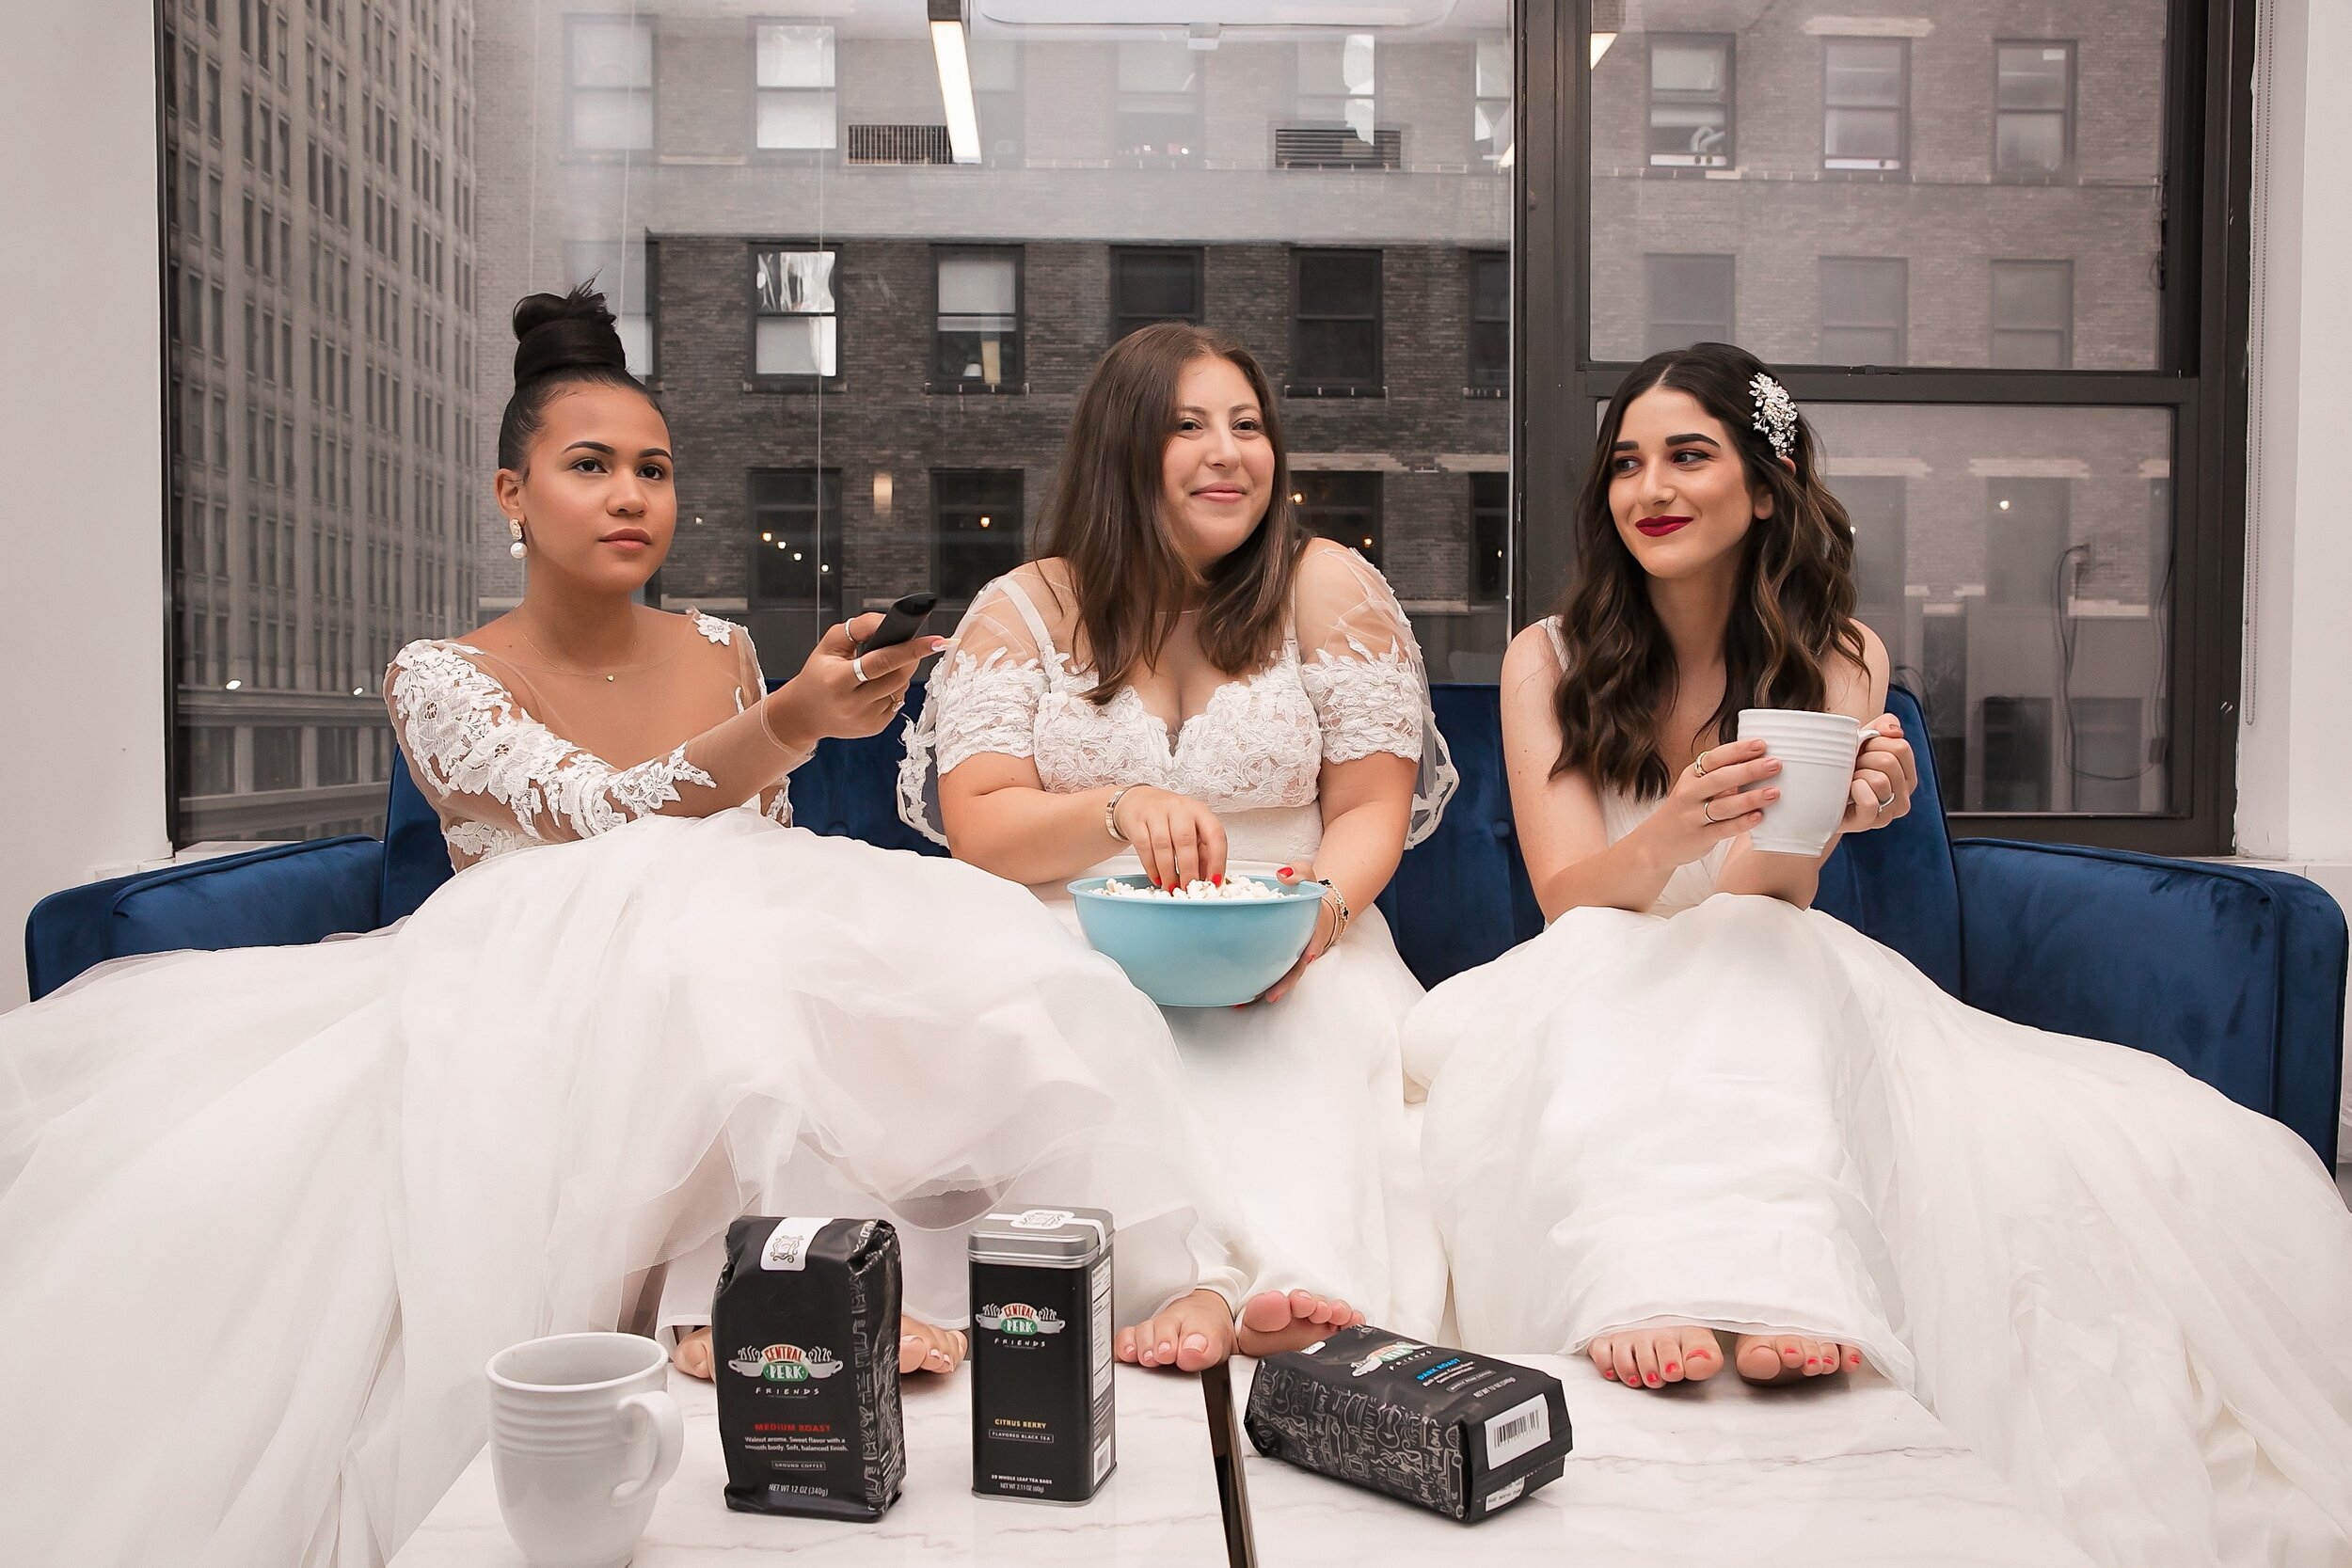 Recreating A Scene From Friends How To Plan A Group Photoshoot Esther Santer NYC Blogging Photoshoot Wedding Dresses Gowns White Rachel Monica Phoebe Popcorn Coffee Movie Night Funny Cosplay Bridal Hair Pretty Beautiful Girls Women Beer  Style Trend.JPG